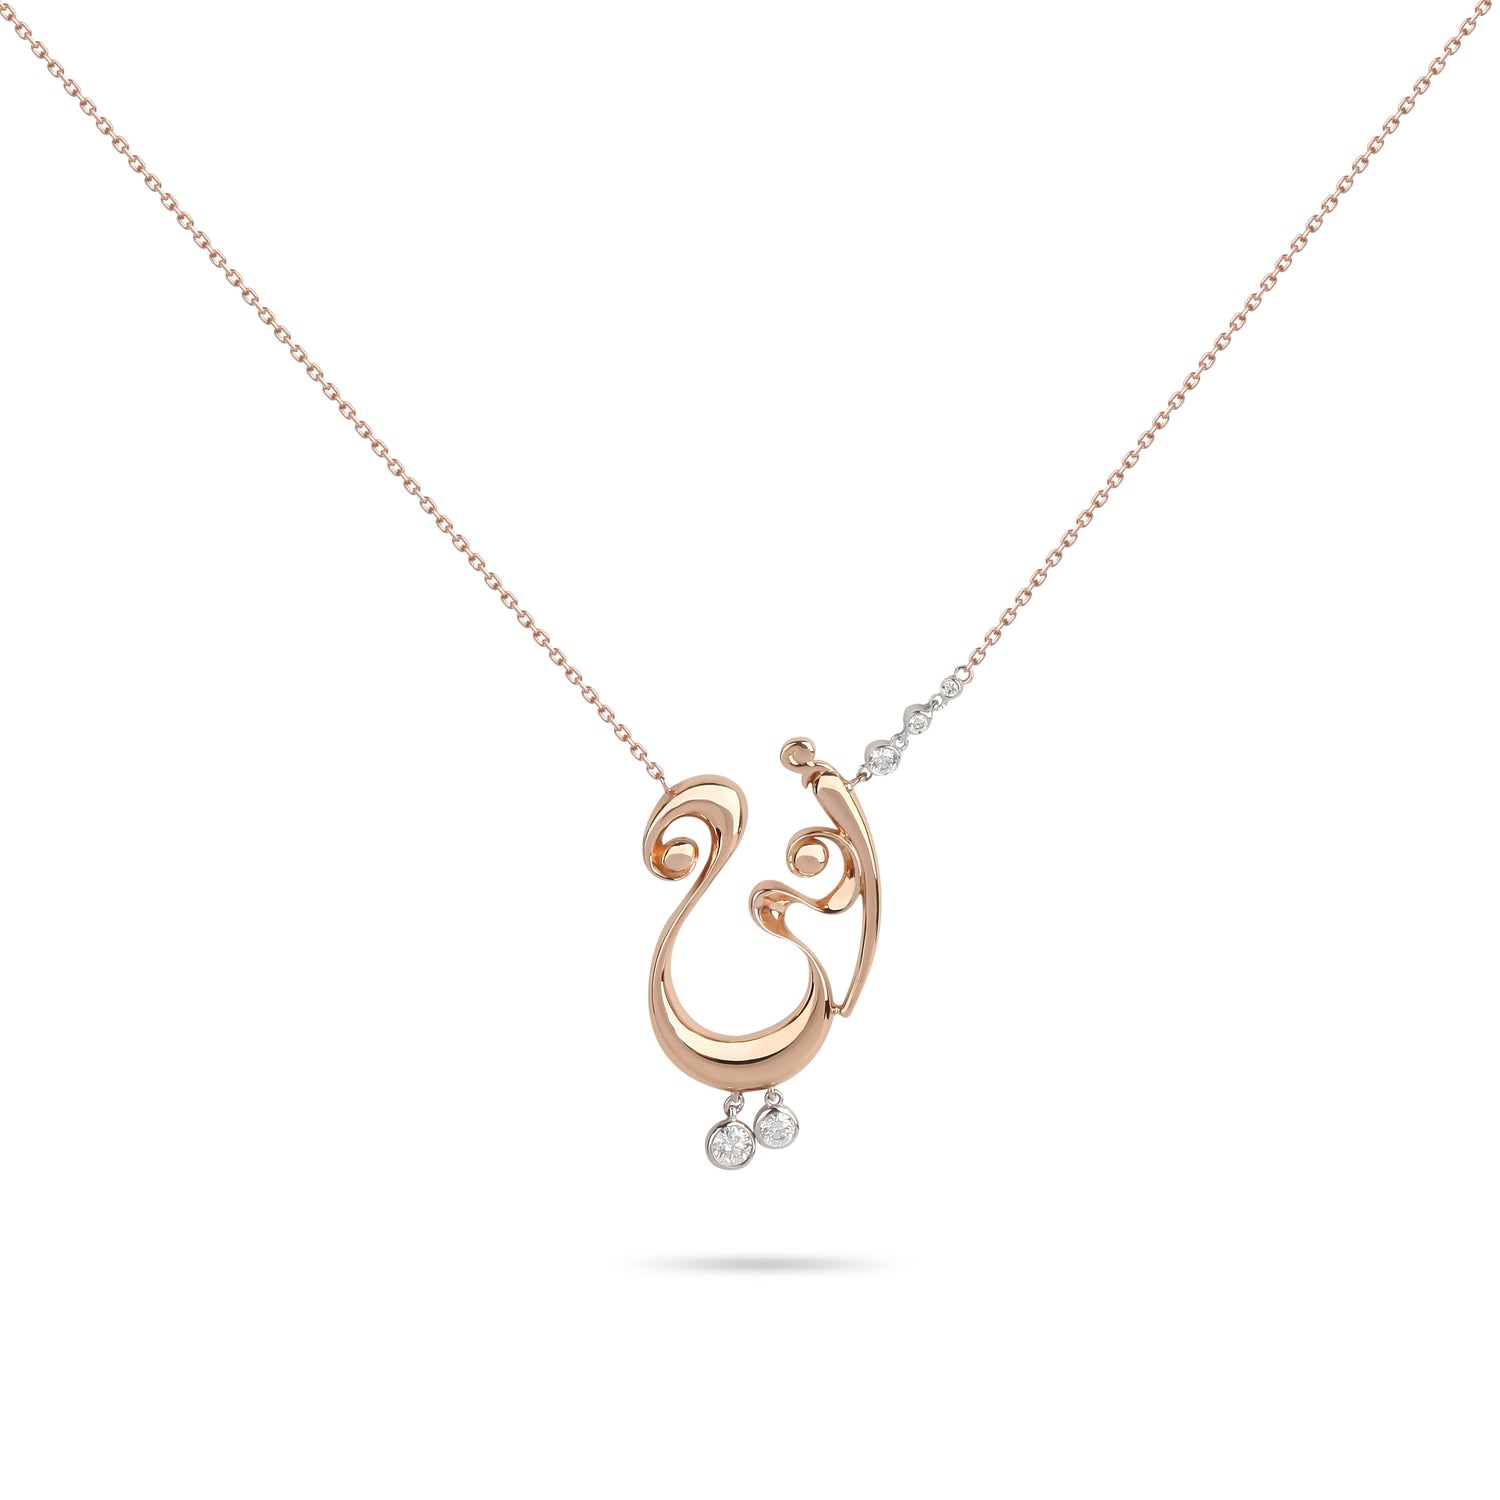 The Mothers' Day Edition - Custom Arabic Letter "Mother" Rose Gold & Diamond Necklace | Buy Necklace Online